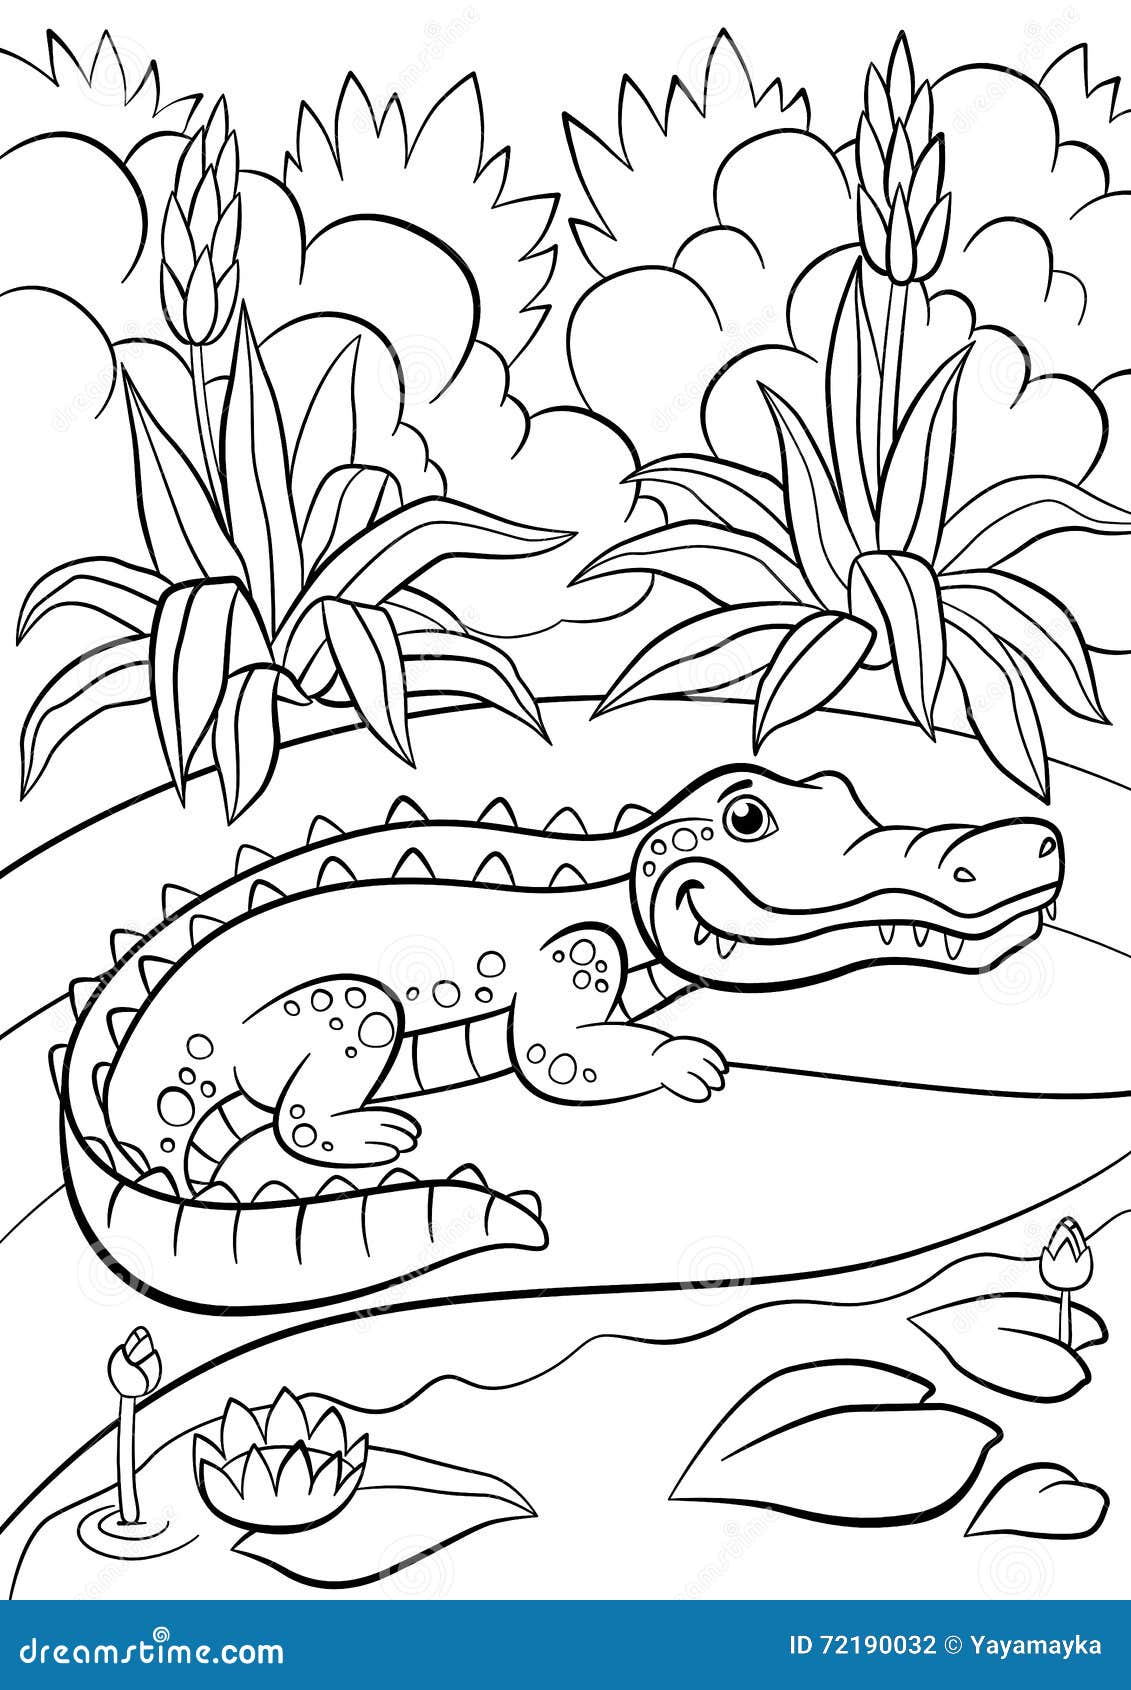 Coloring Pages. Animals. Little Cute Alligator Stock Vector ...